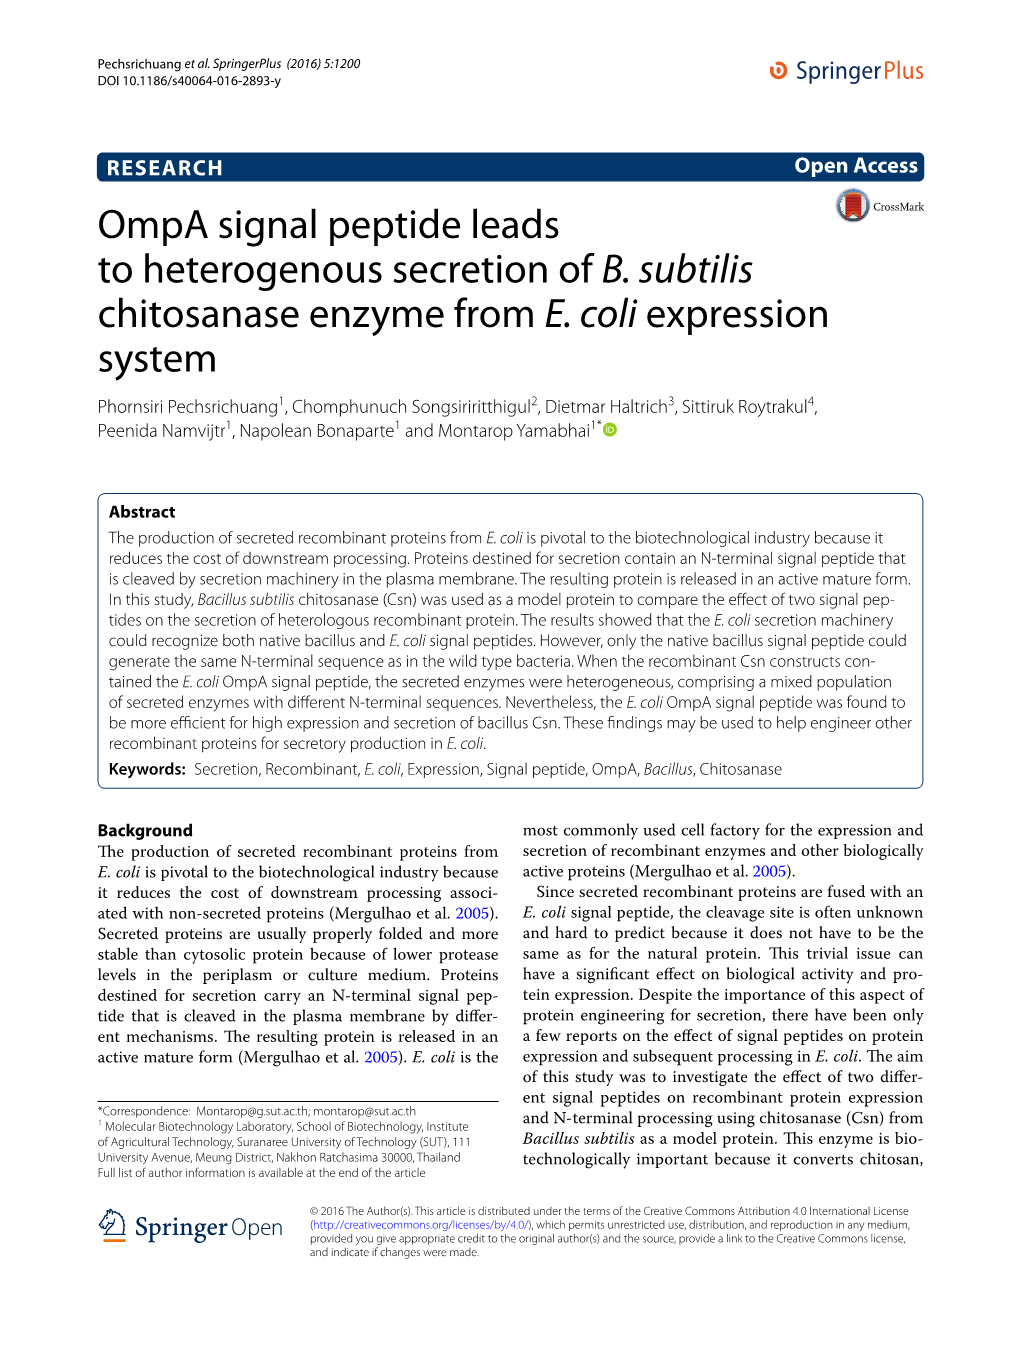 Ompa Signal Peptide Leads to Heterogenous Secretion of B. Subtilis Chitosanase Enzyme from E. Coli Expression System